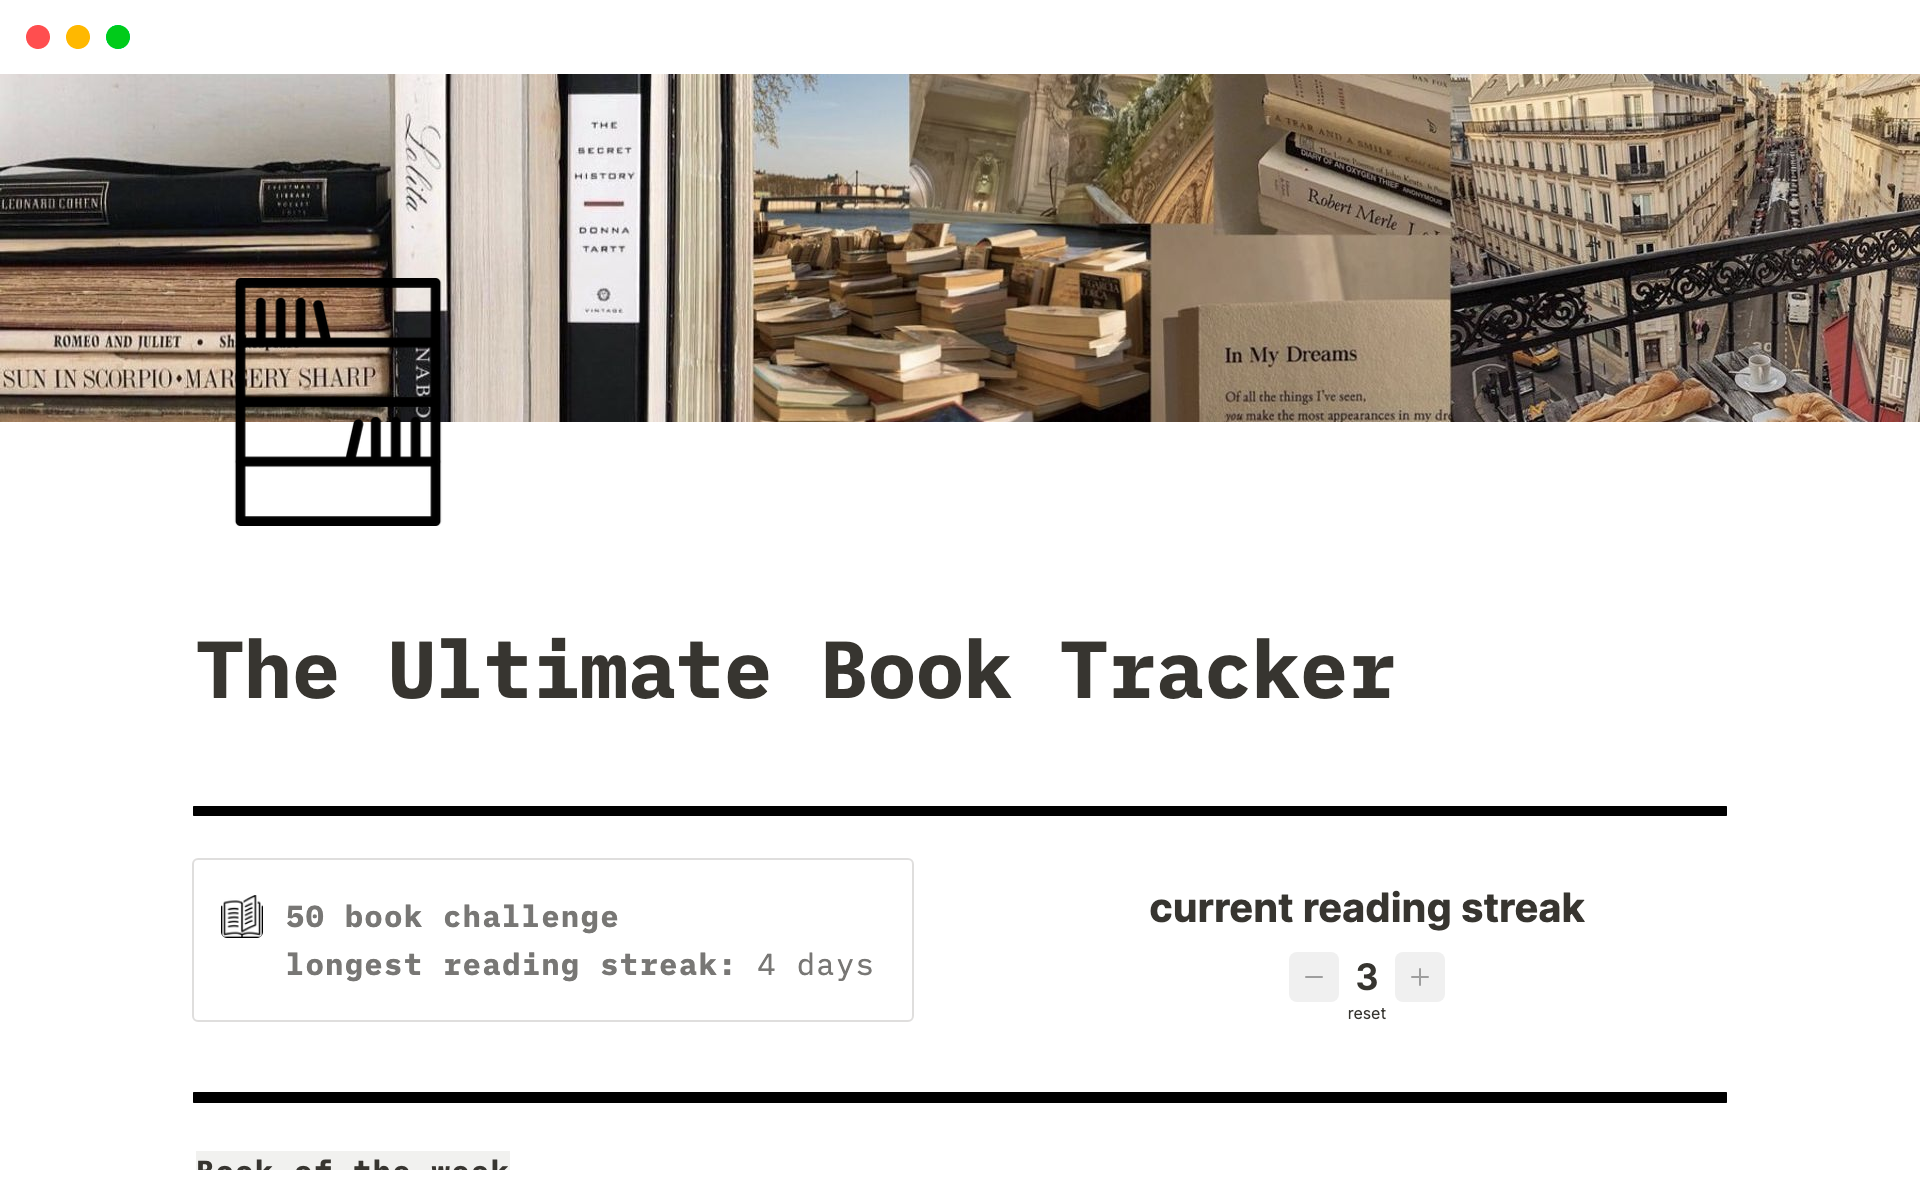 The Ultimate Book Tracker is a template designed to help readers organize and track their reading progress, with the added bonus of a book challenge to keep them motivated.